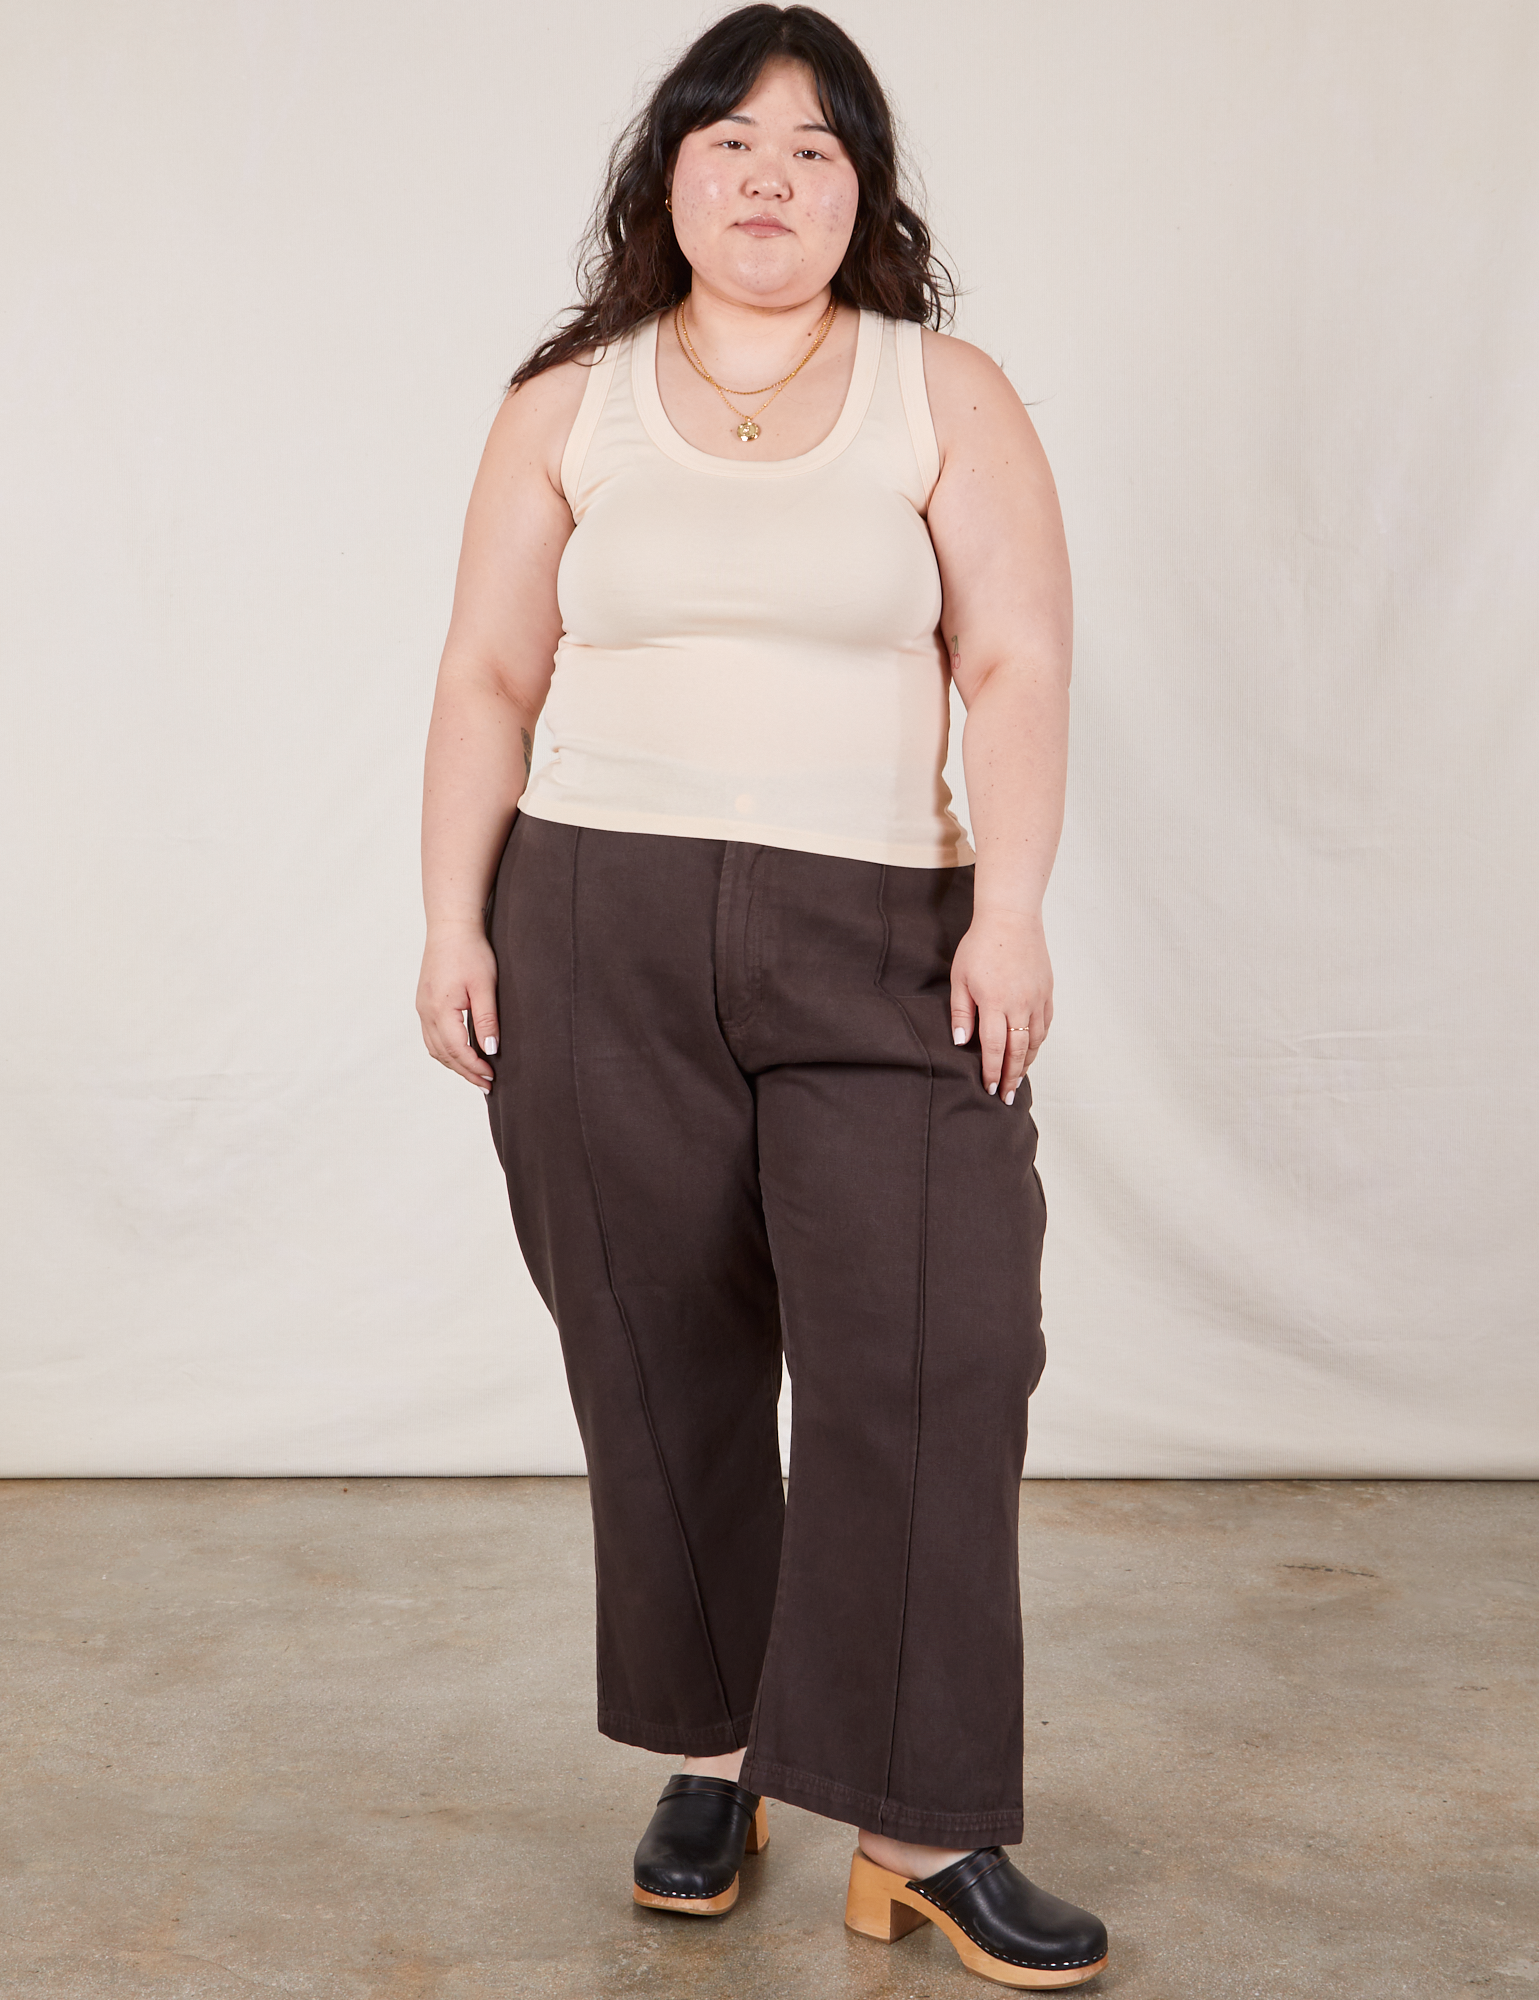 Ashley is 5’7” and wearing L Tank Top in Vintage Tee Off-White paired with espresso brown Western Pants